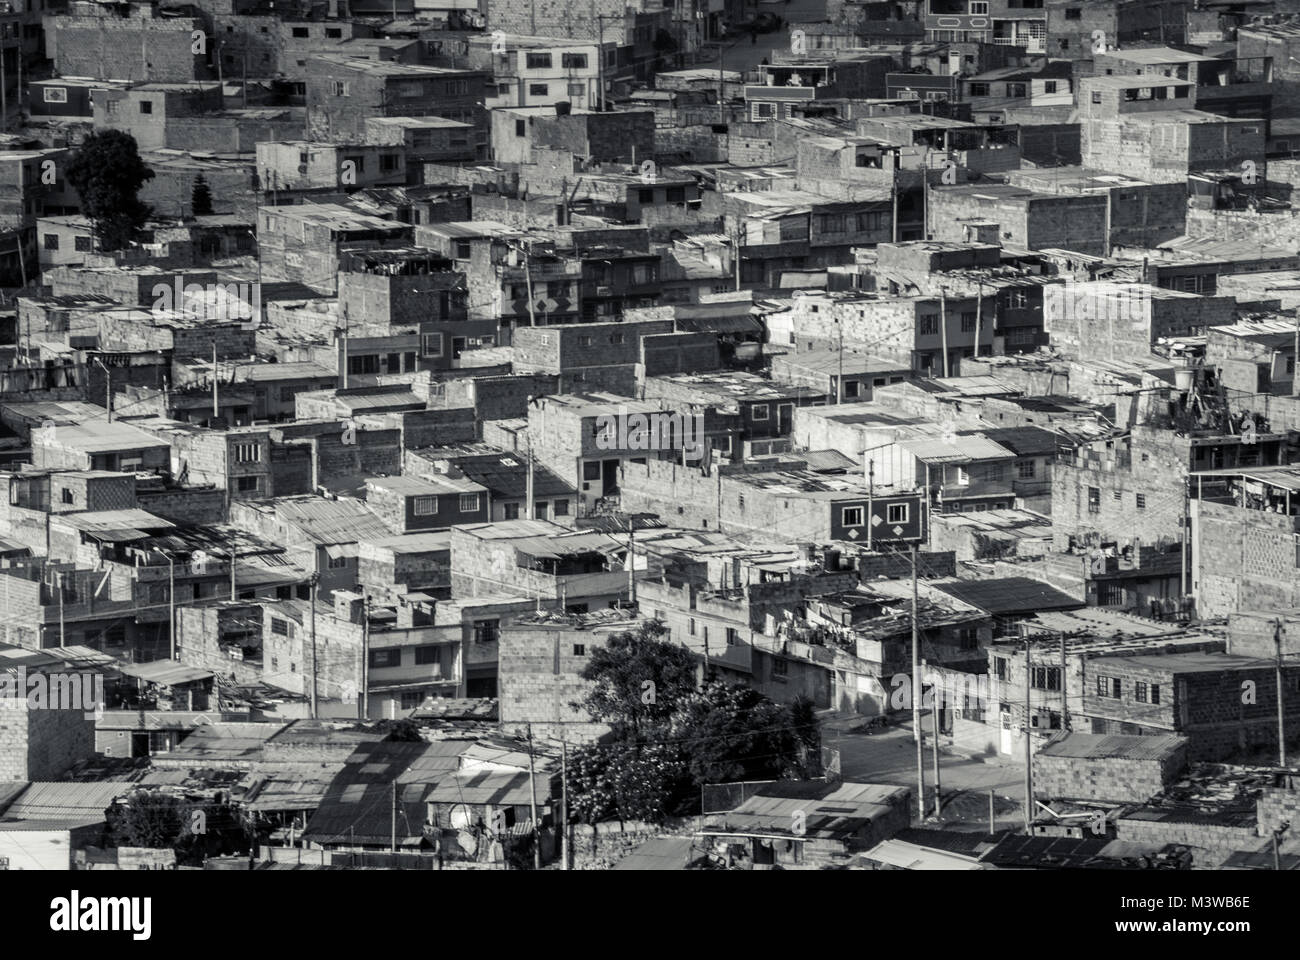 A black and white close-up photo of the buildings of a shanty town in Bogota, Colombia Stock Photo